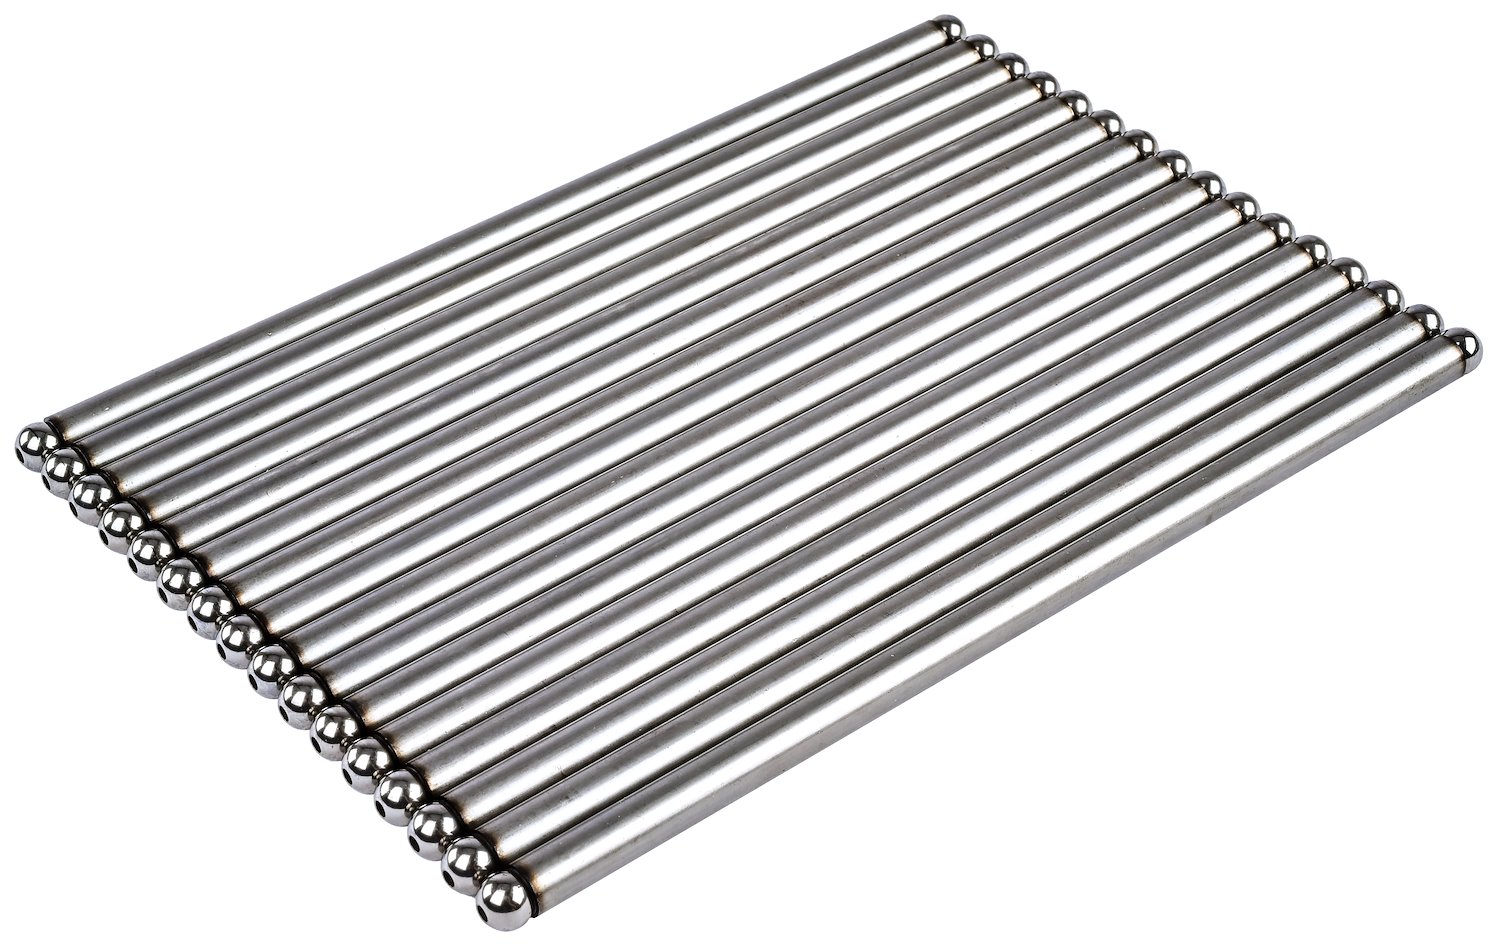 7.694 in. Long Pushrods for 1969-1993 Small Block Ford 351W V8 with Retrofit Hydraulic Roller Cam